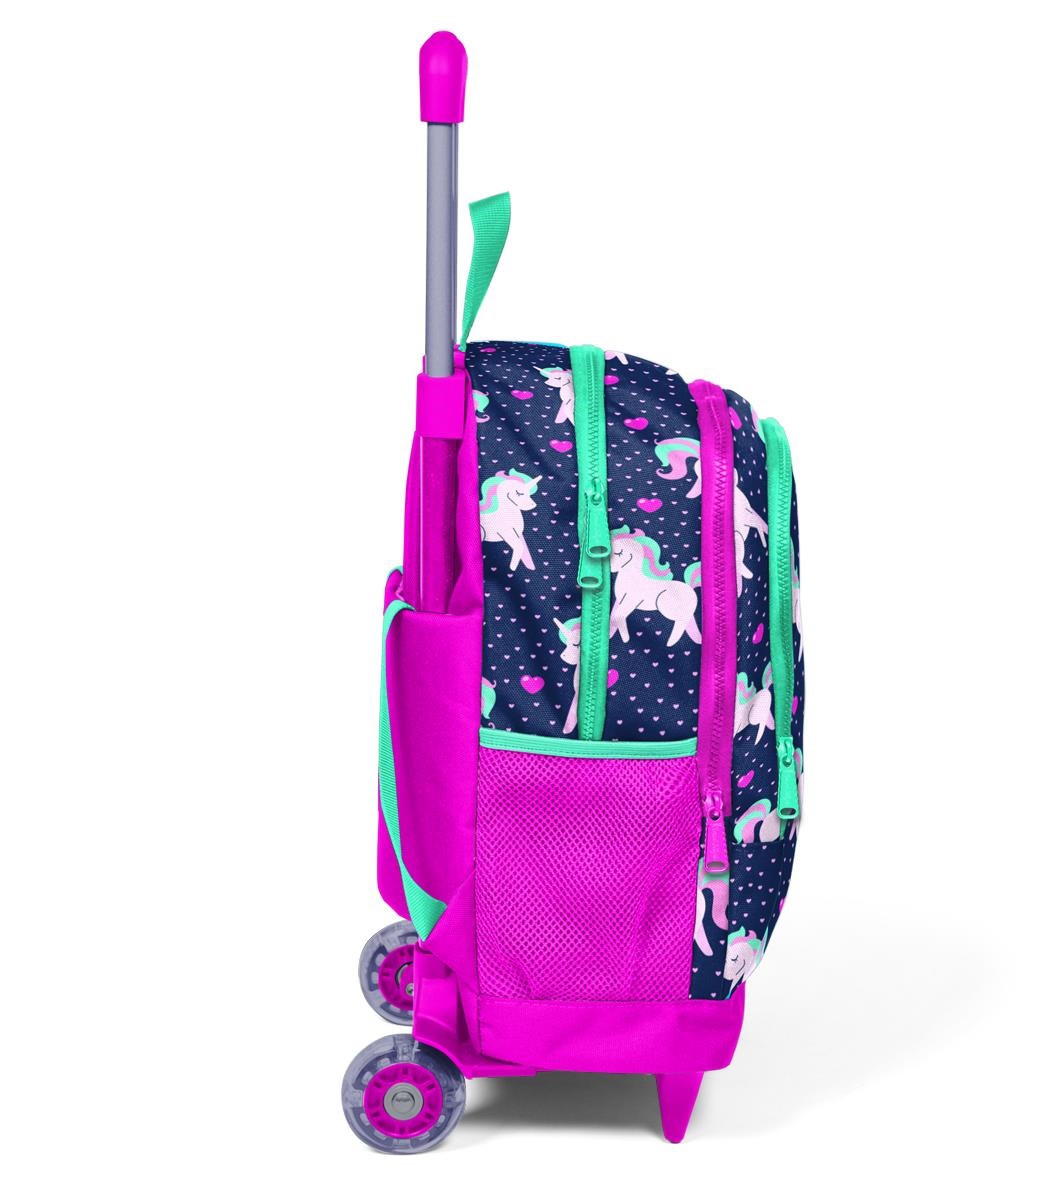 Coral High Kids Three Compartment Squeegee School Backpack - Navy Pink Unicorn Patterned